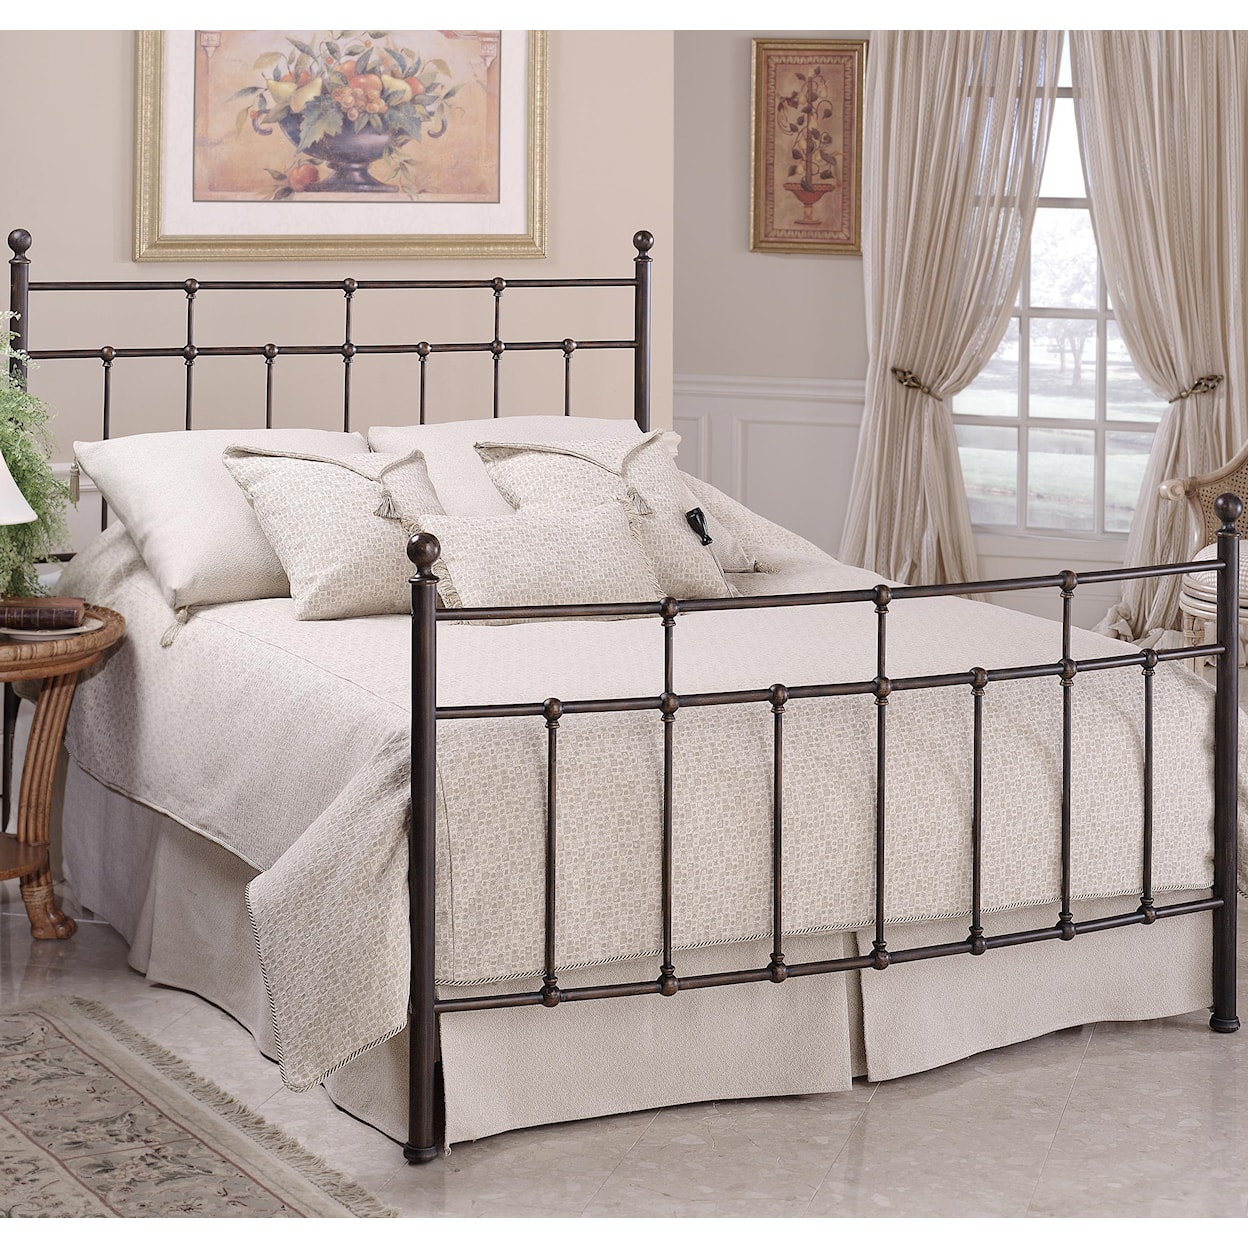 Hillsdale Metal Beds Queen Providence Bed